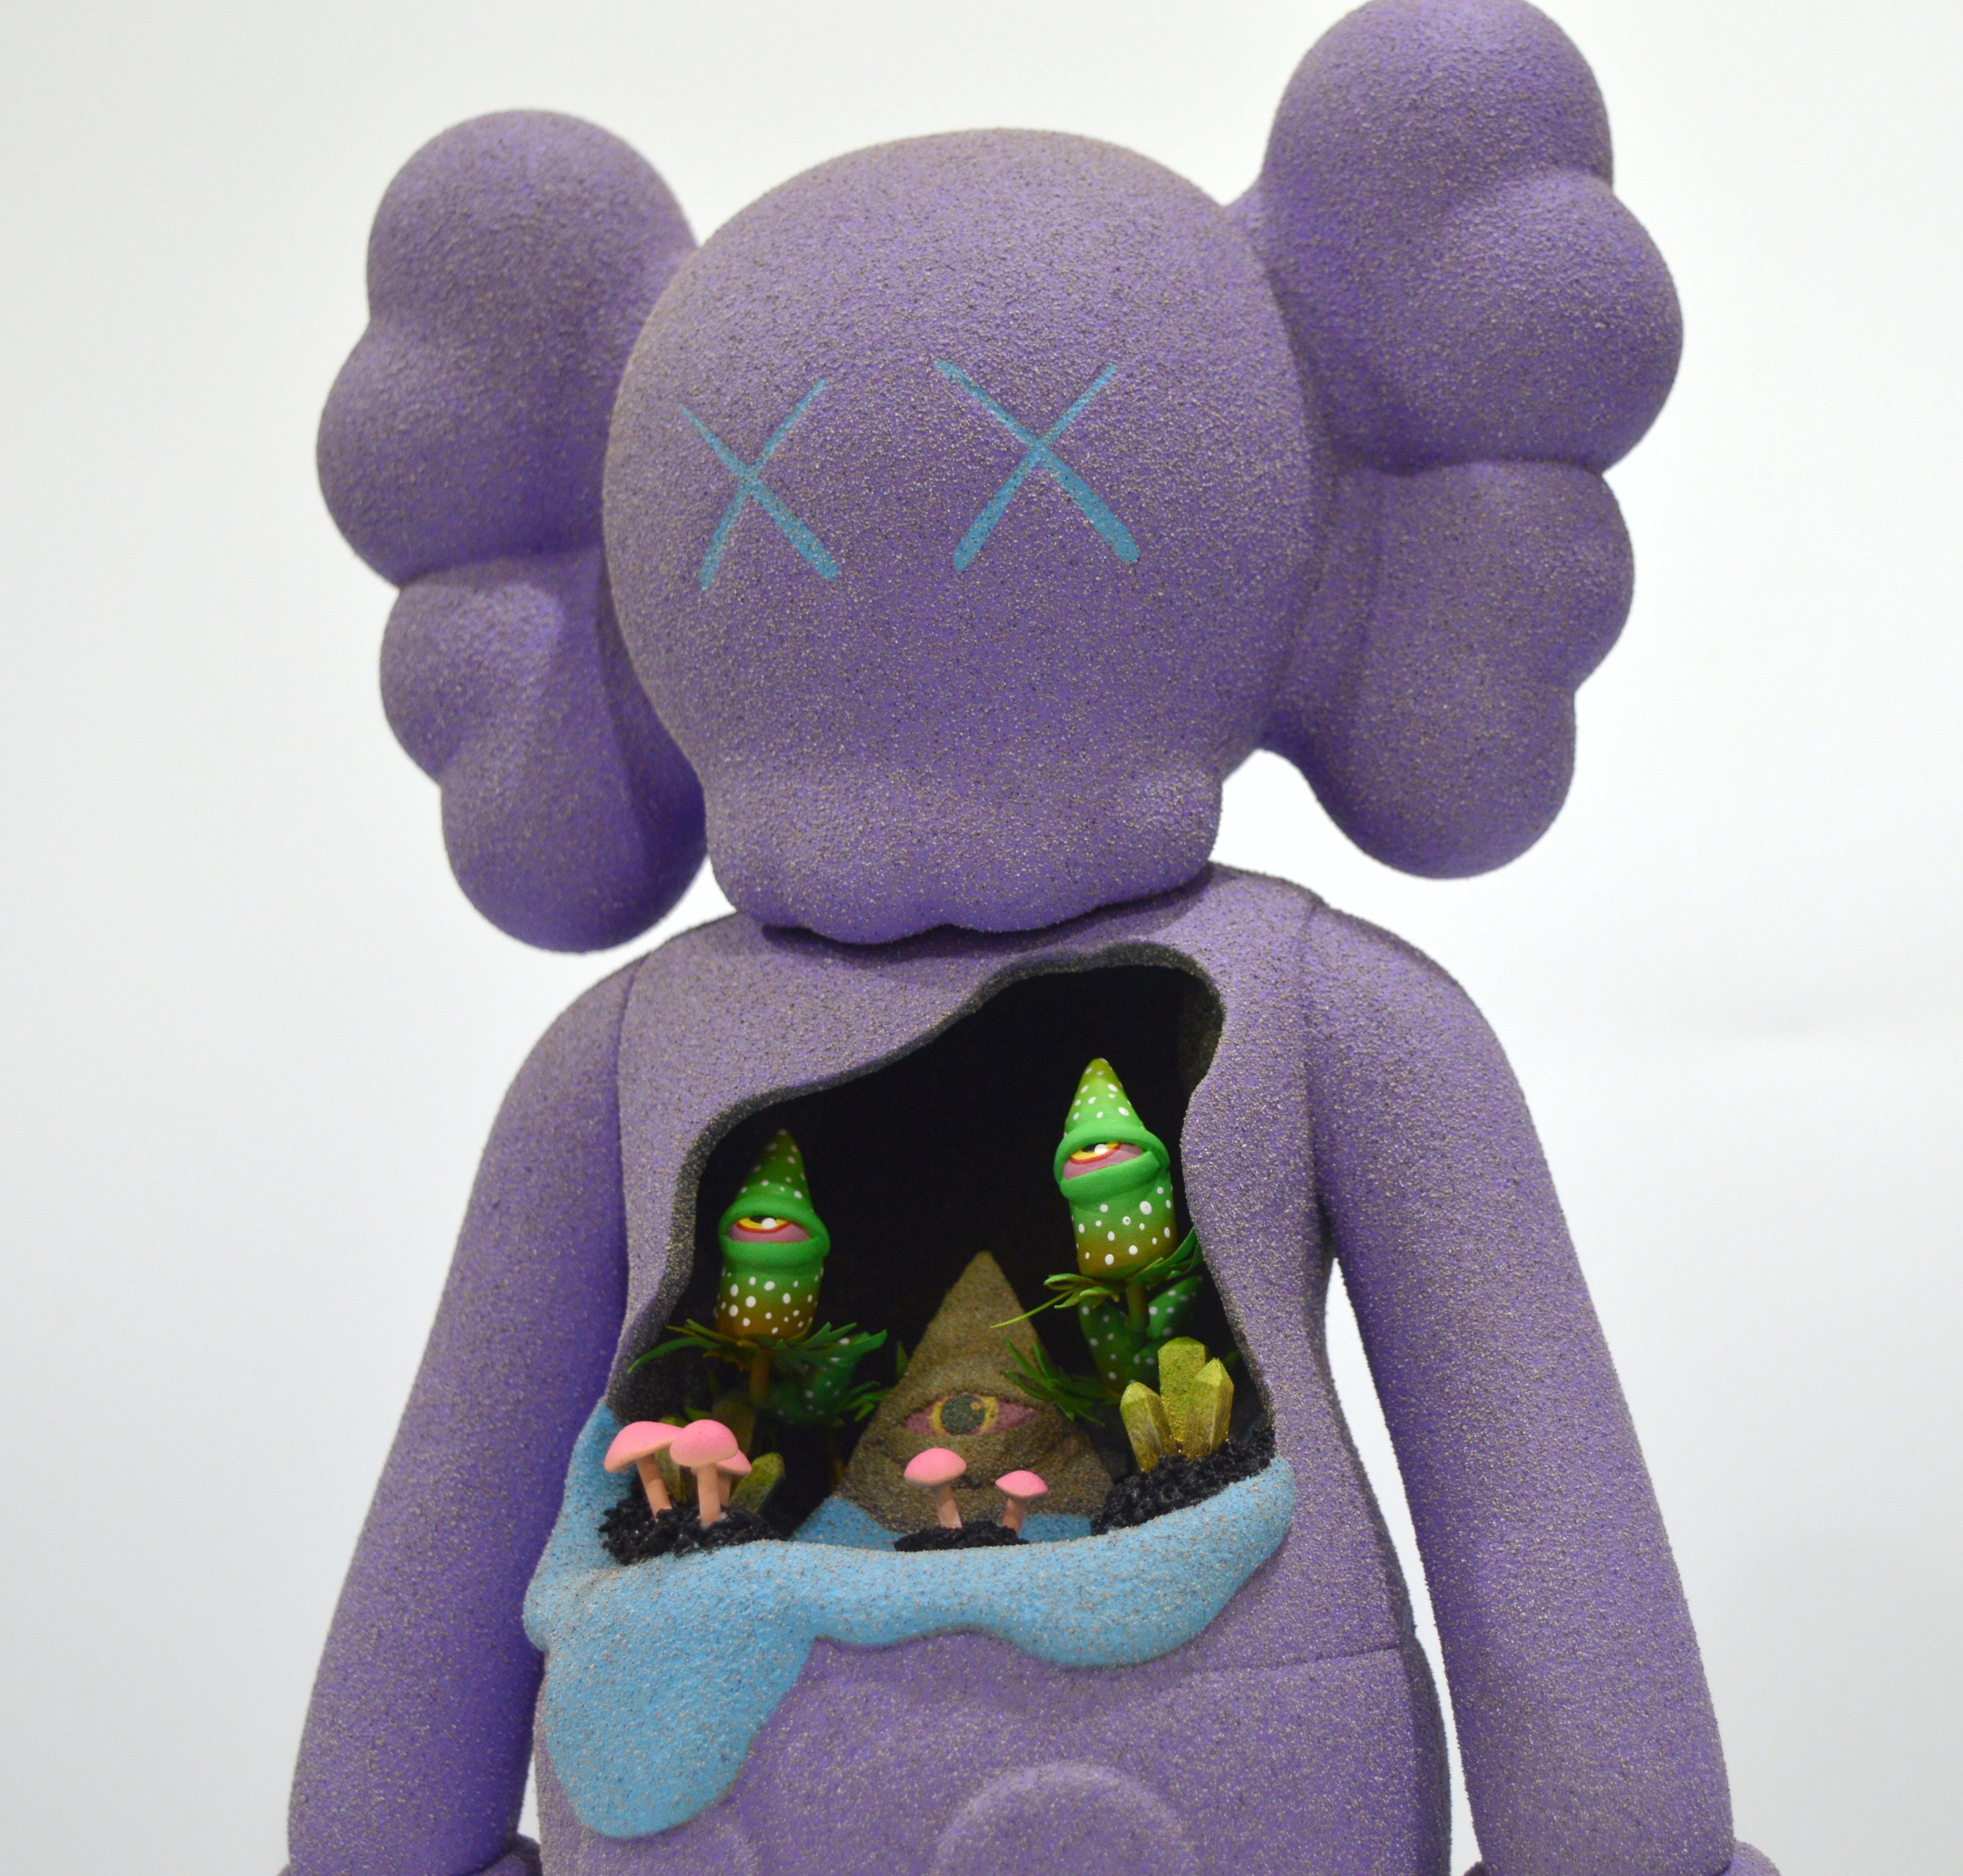 Misappropriated Icon 5 - "Moonrock Kaws" Stoned Eye Shrine Edition by Nugglife